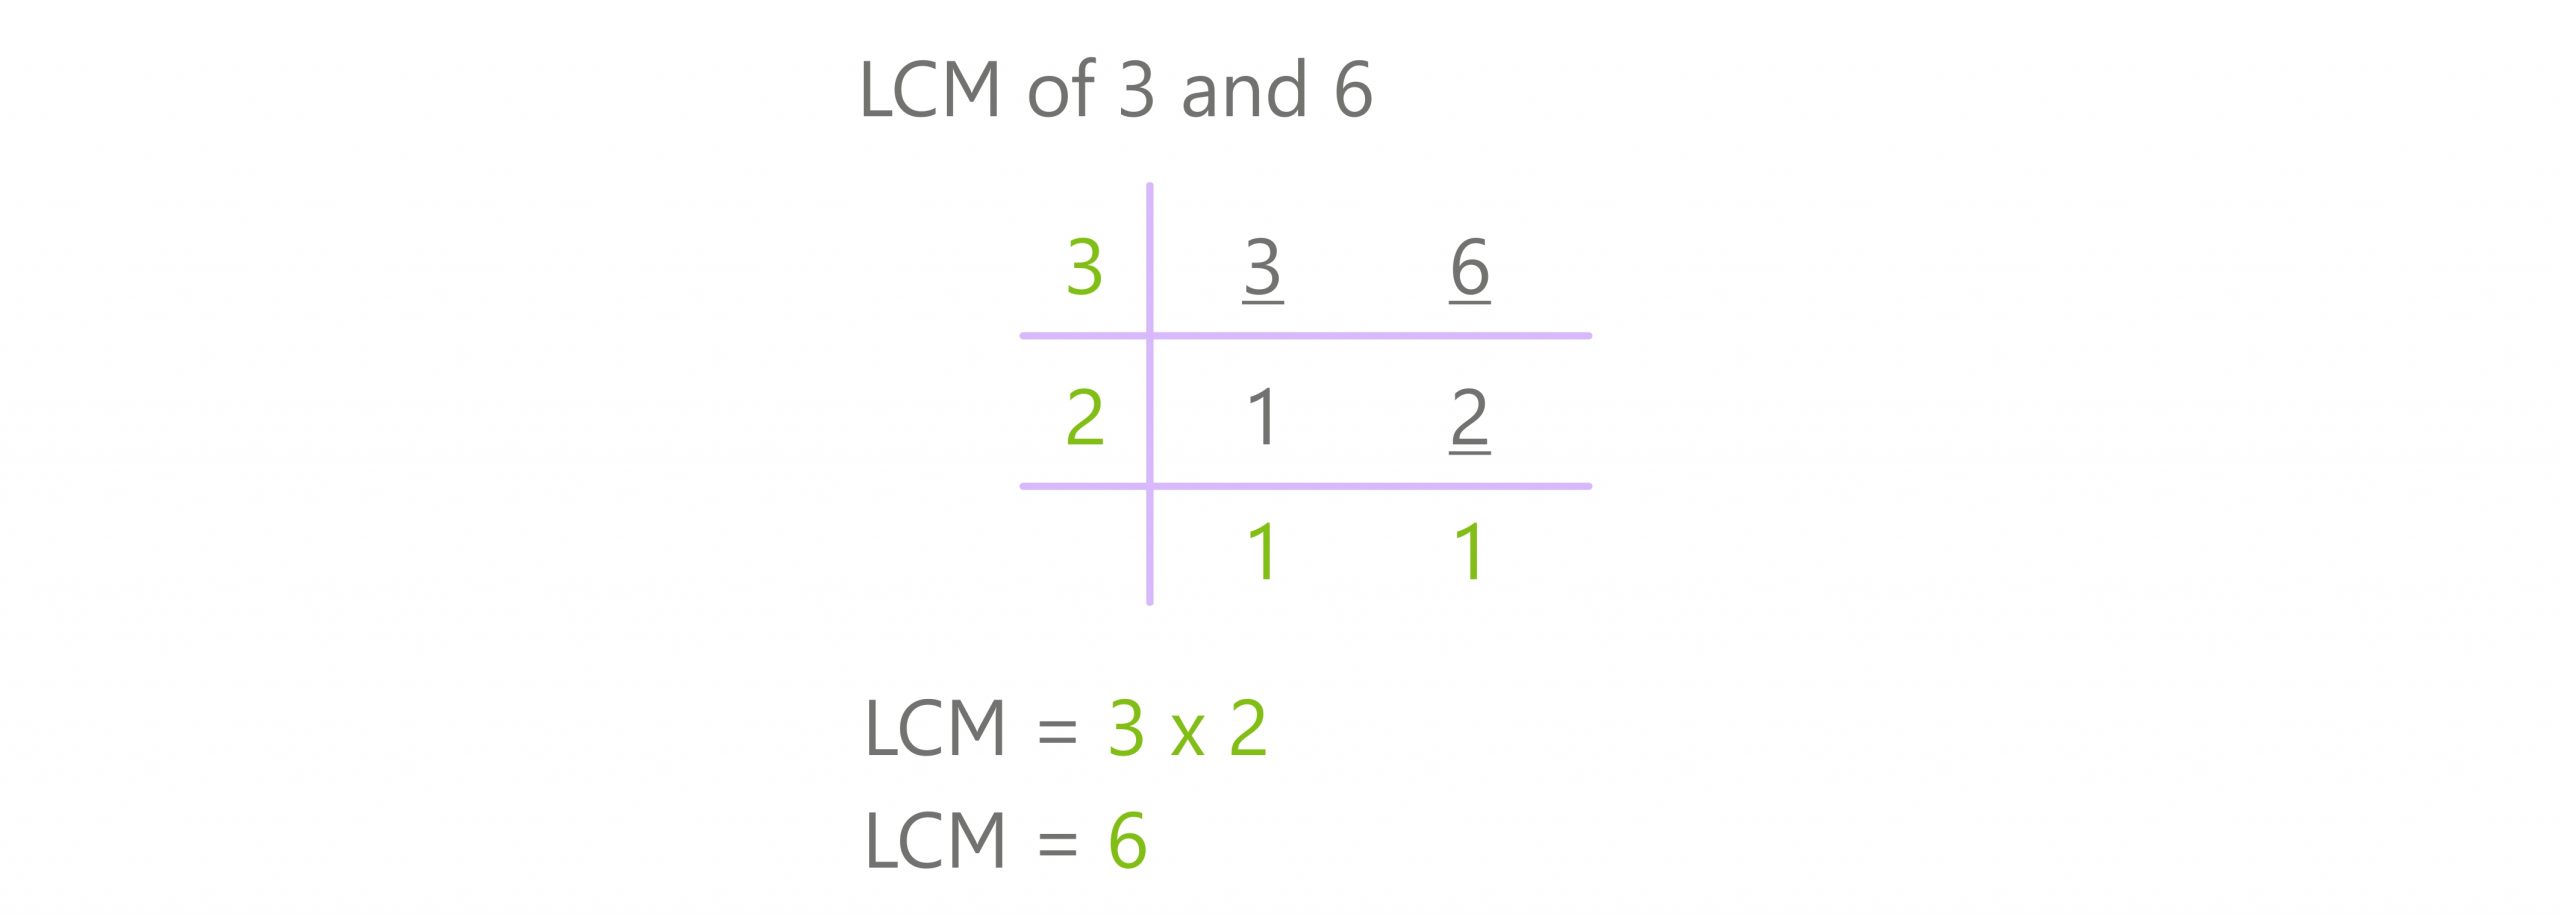 division method lcm 3 and 6